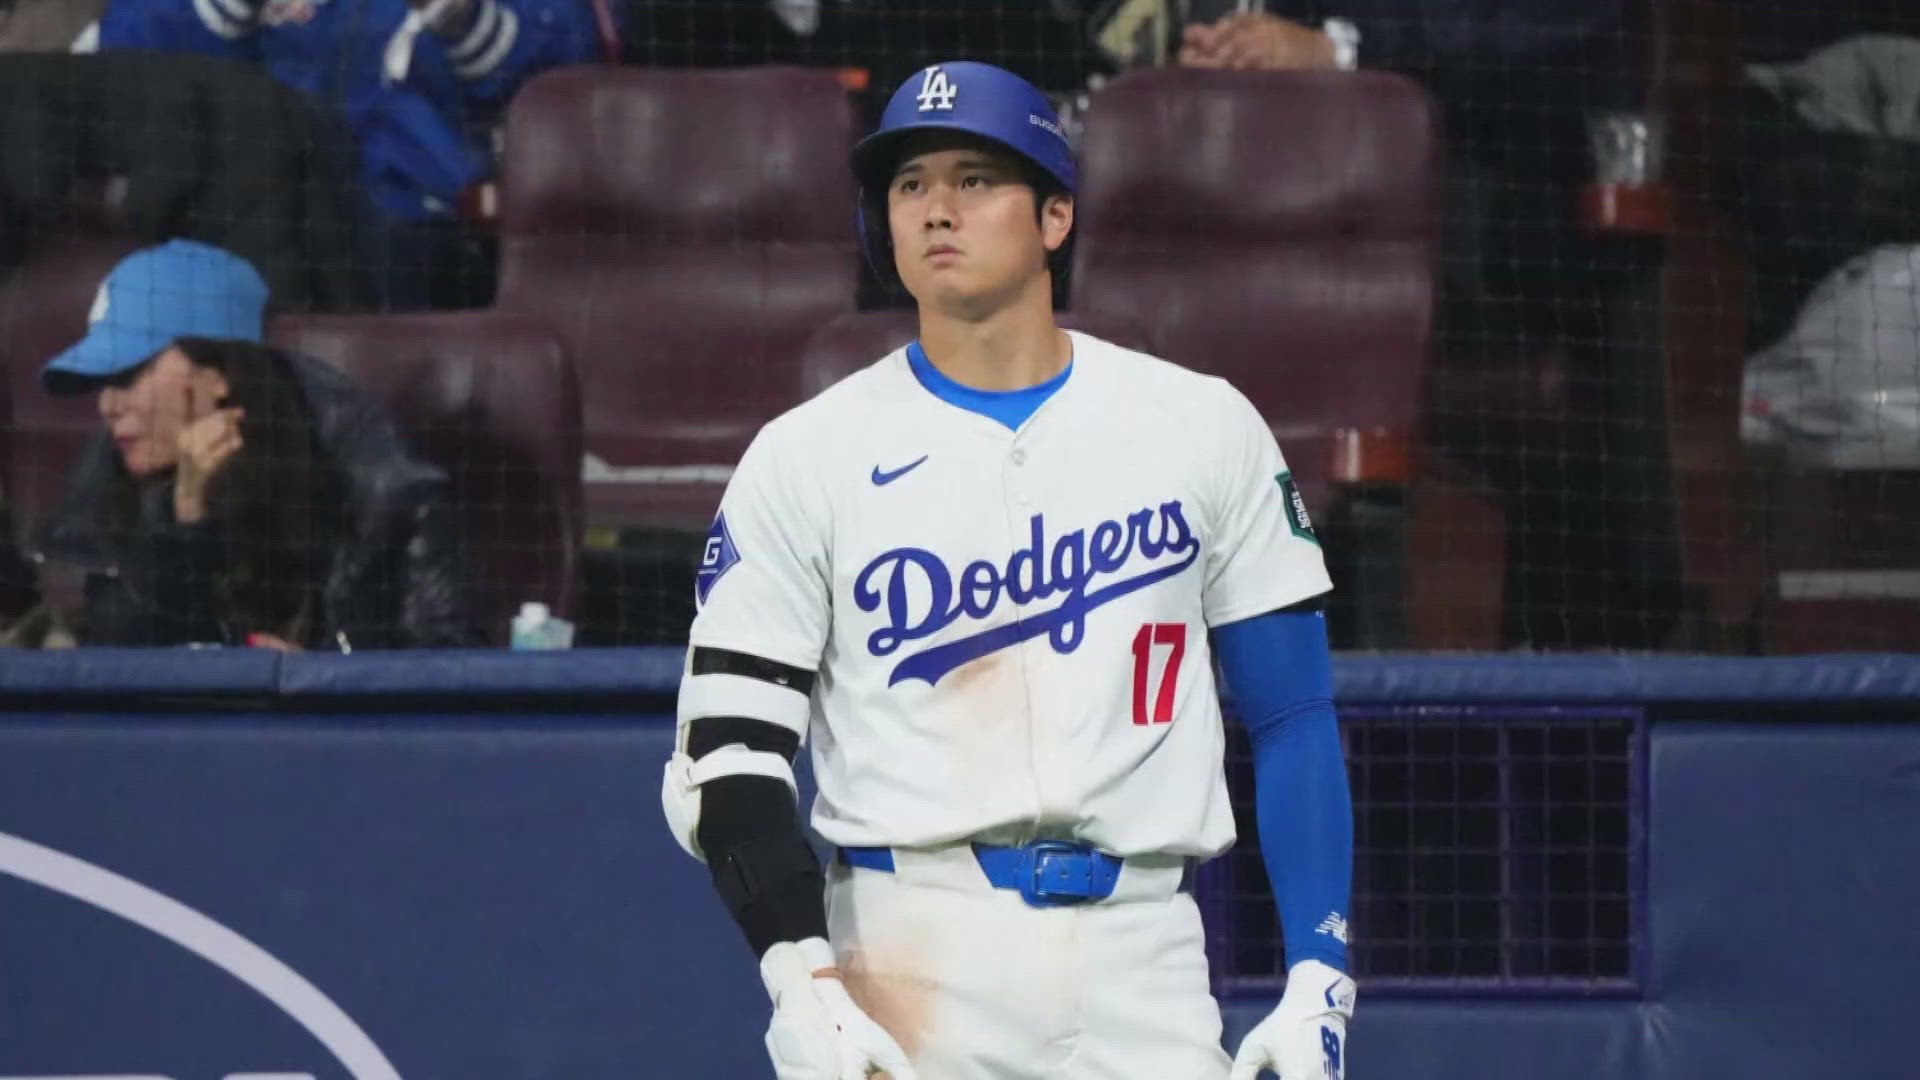 This case centers around $4.5 million in wire transfers from Ohtani's account to a bookmaking operation. Ohtani will continue to play during the investigation.